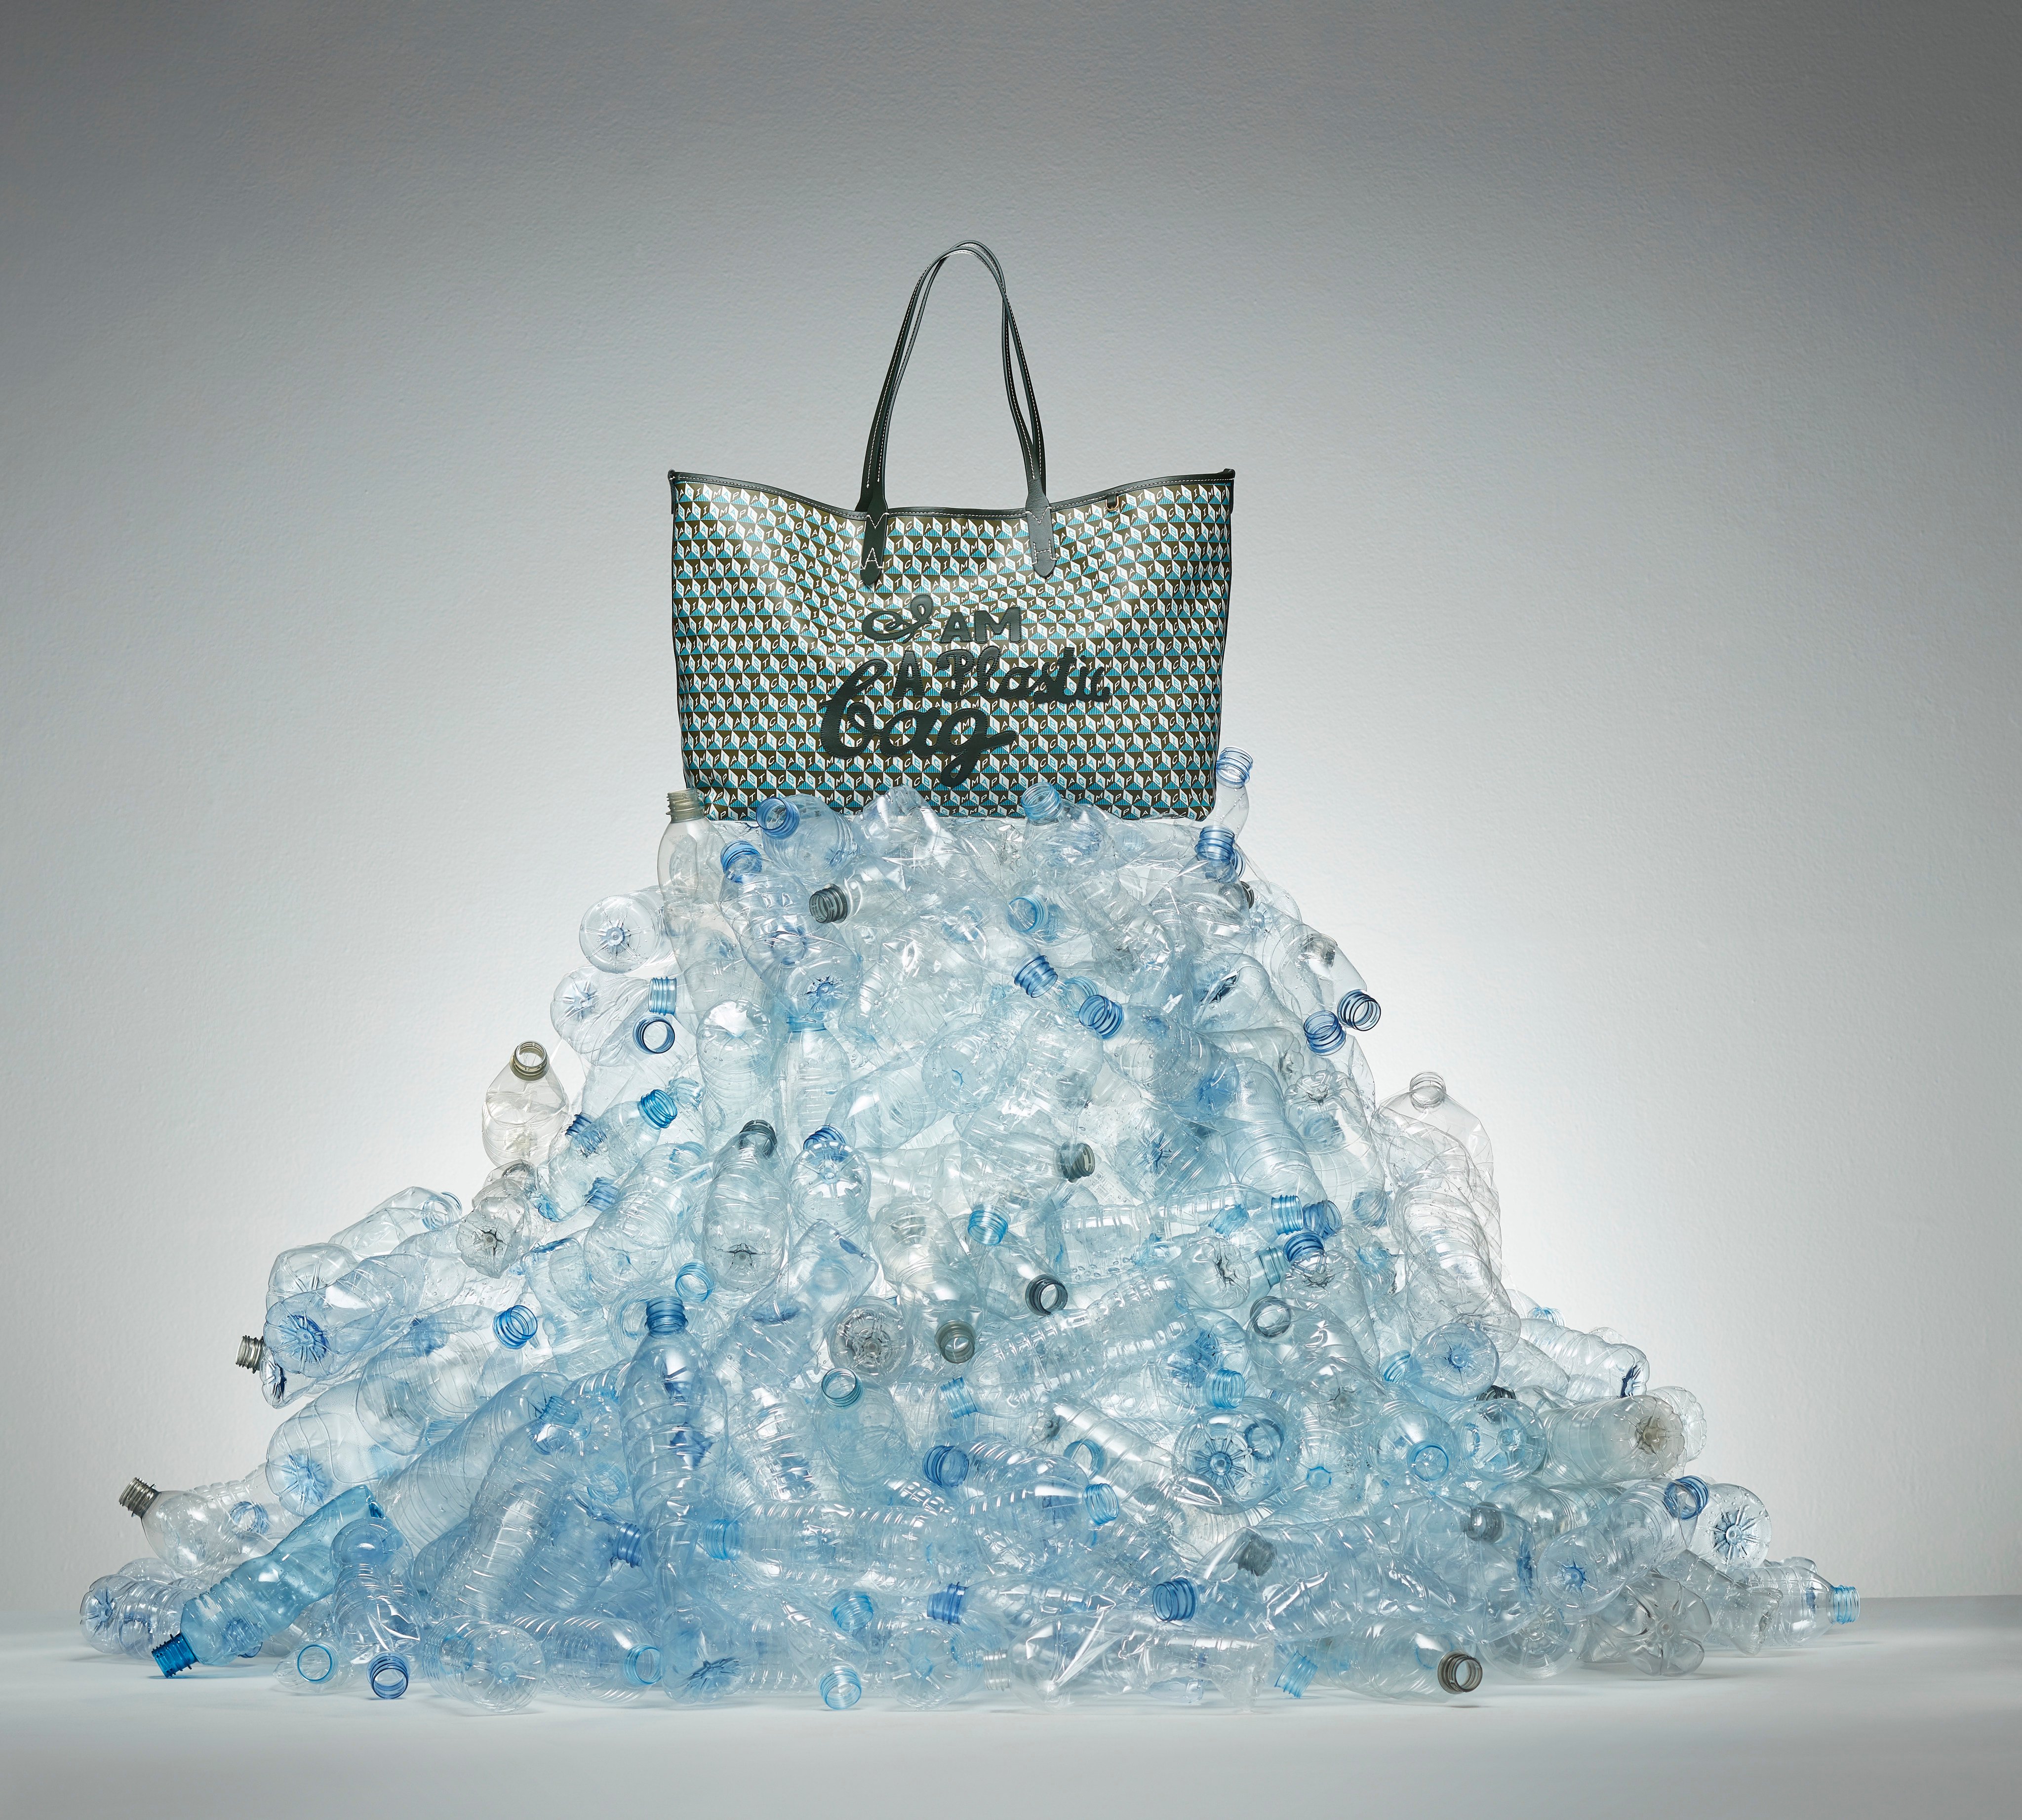 UK designer Anya Hindmarch has taken fashion’s unsustainable footprint to heart with initiatives like her 2020 “I am not a plastic bag” tote made from 32 half-litre recycled plastic bottles. Photo: Anya Hindmarch